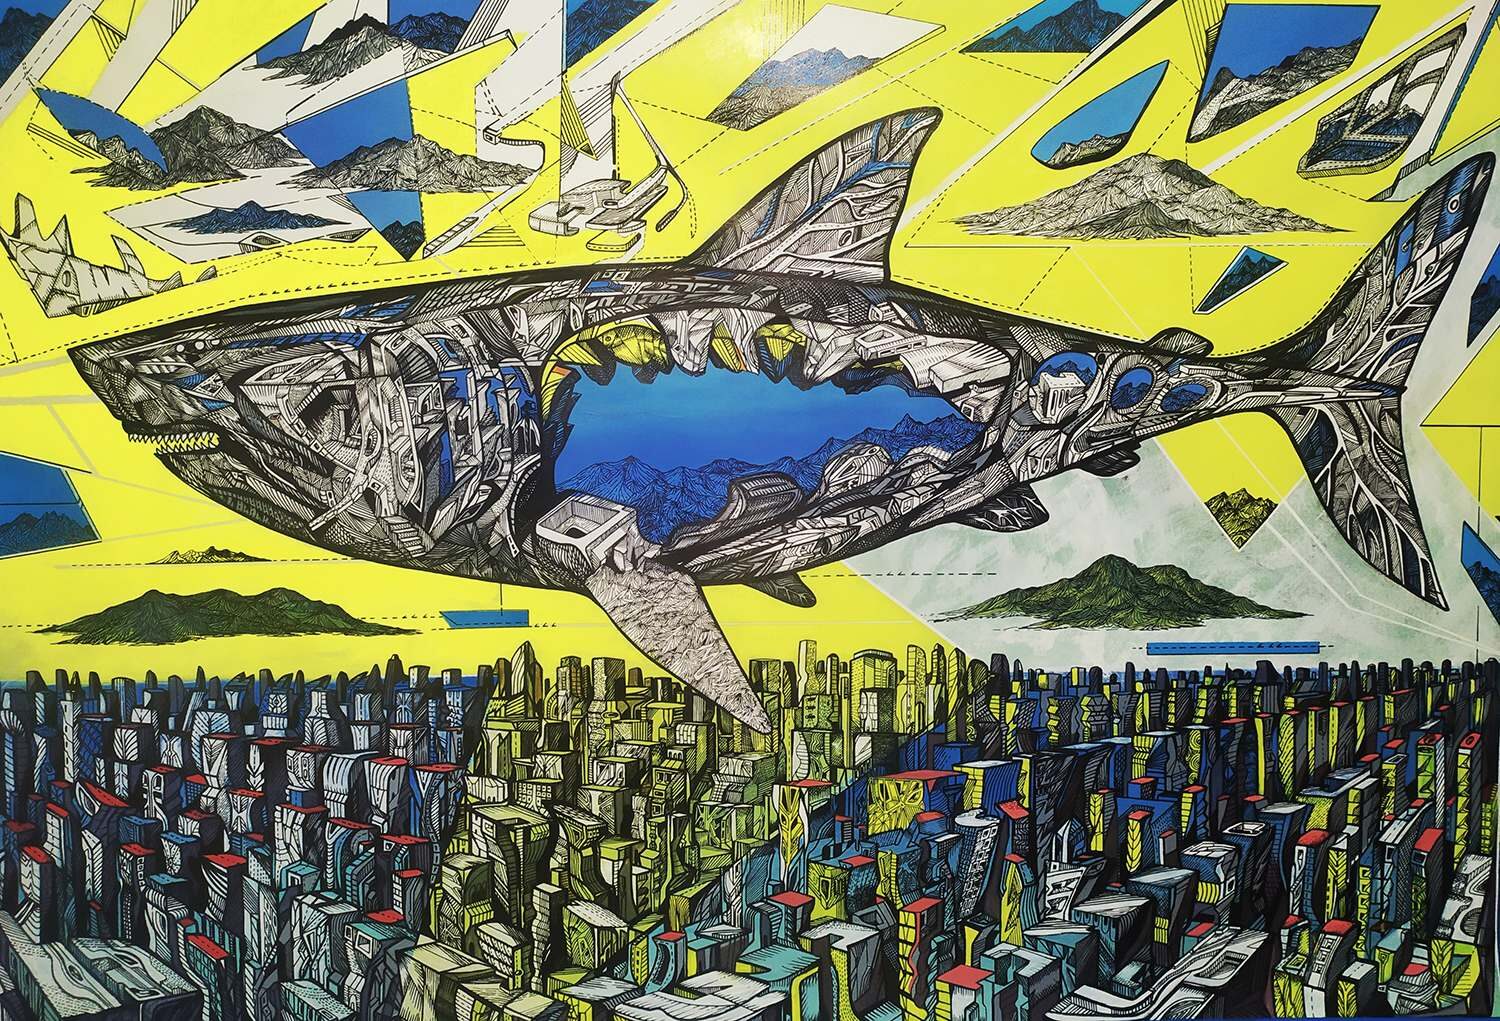 The Endless sea inside is a big white shark painting that circles above the blue city. The painting was made in 2020 by artist Marko Gavrilovic